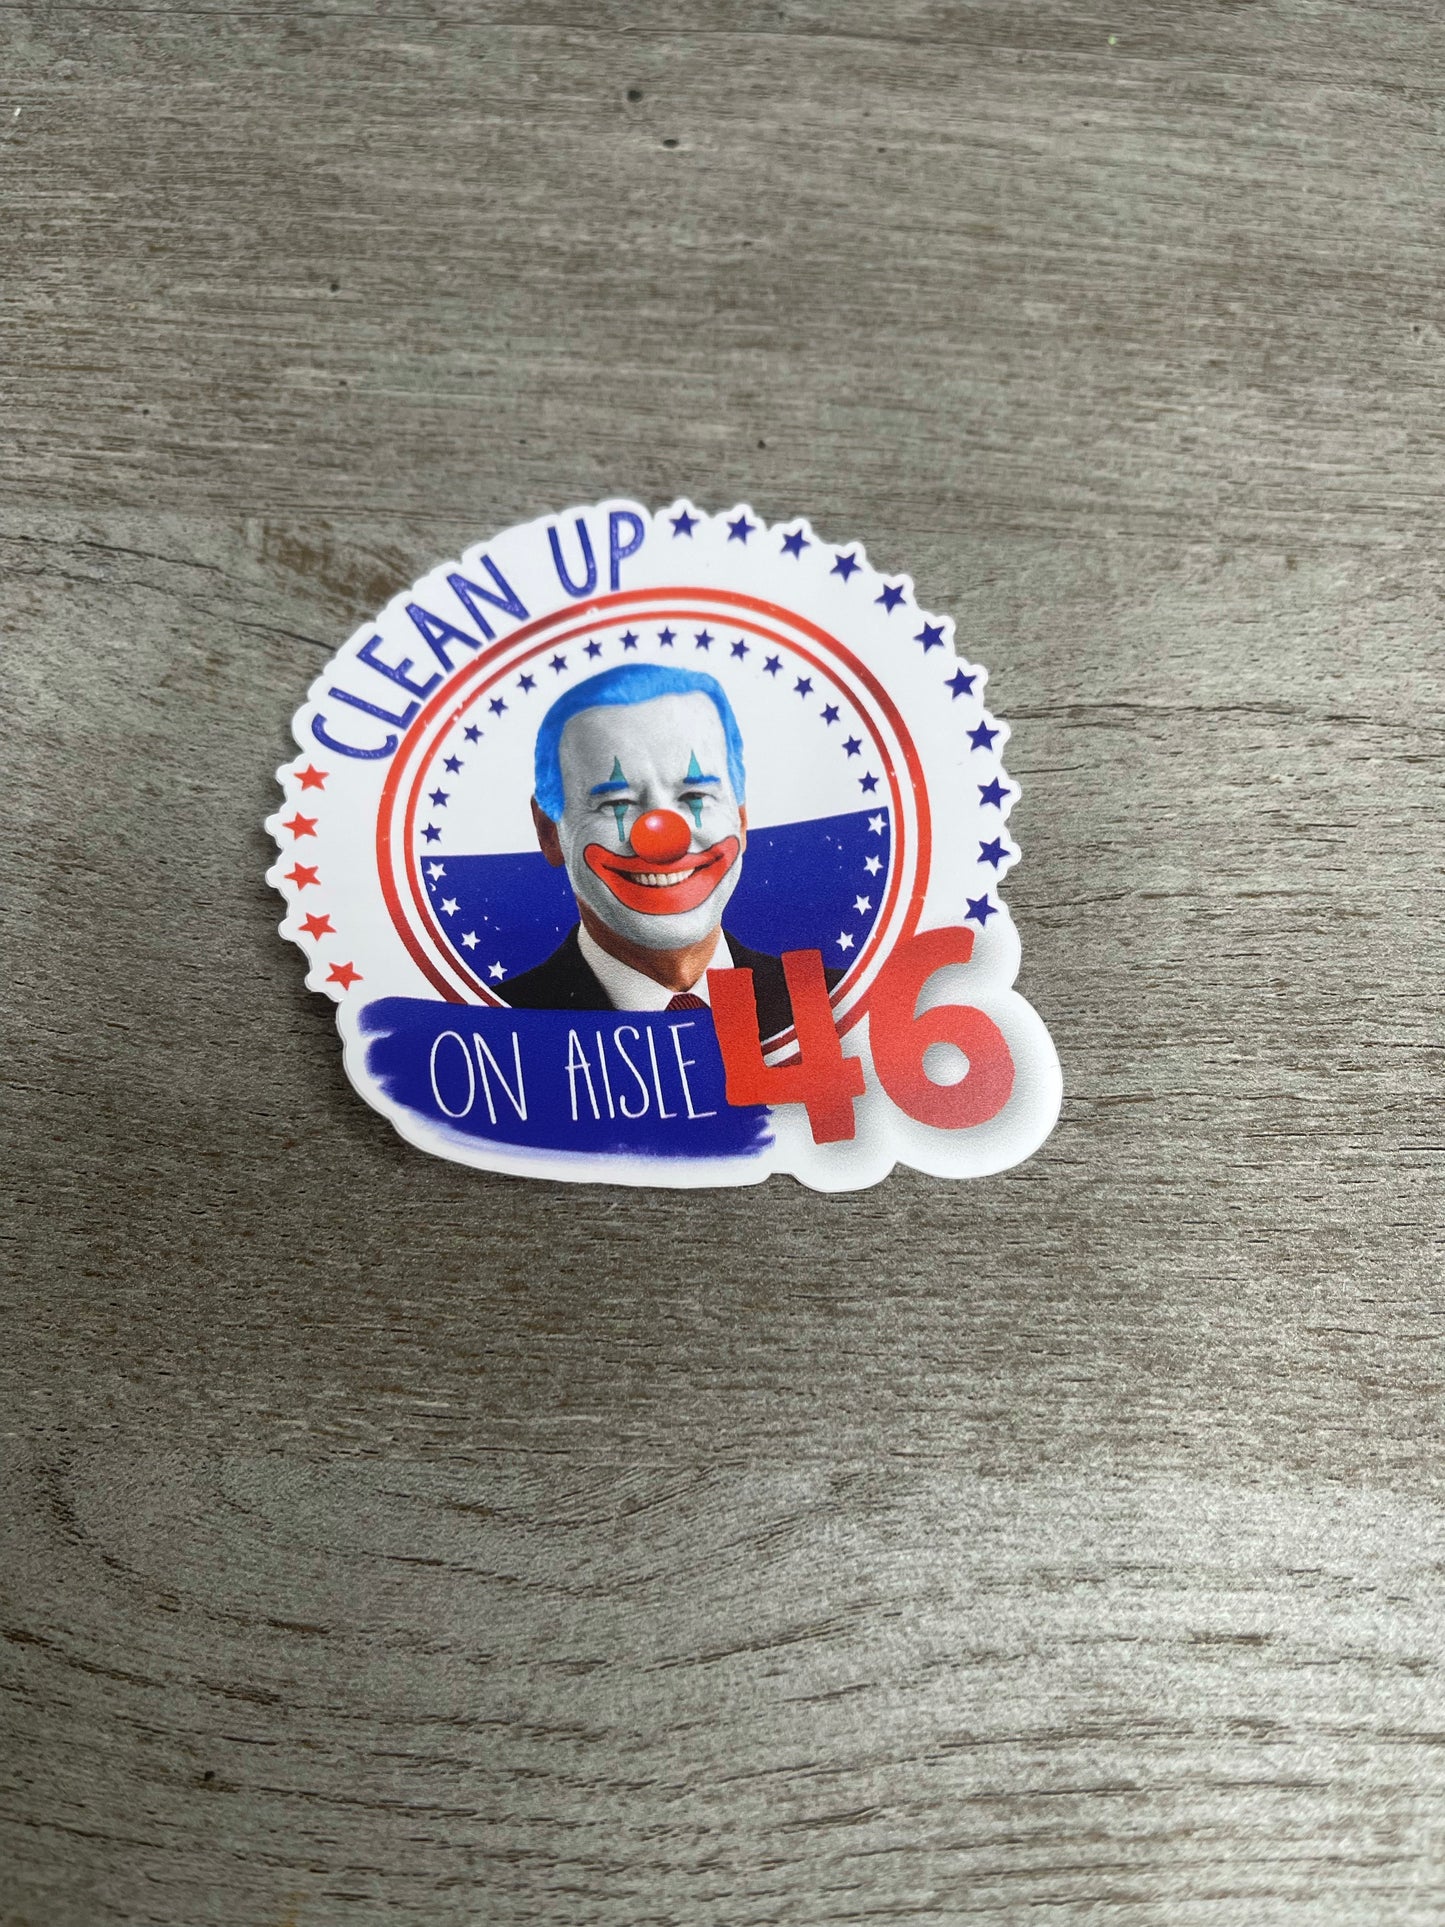 Clean Up On Aisle 46 Sticker